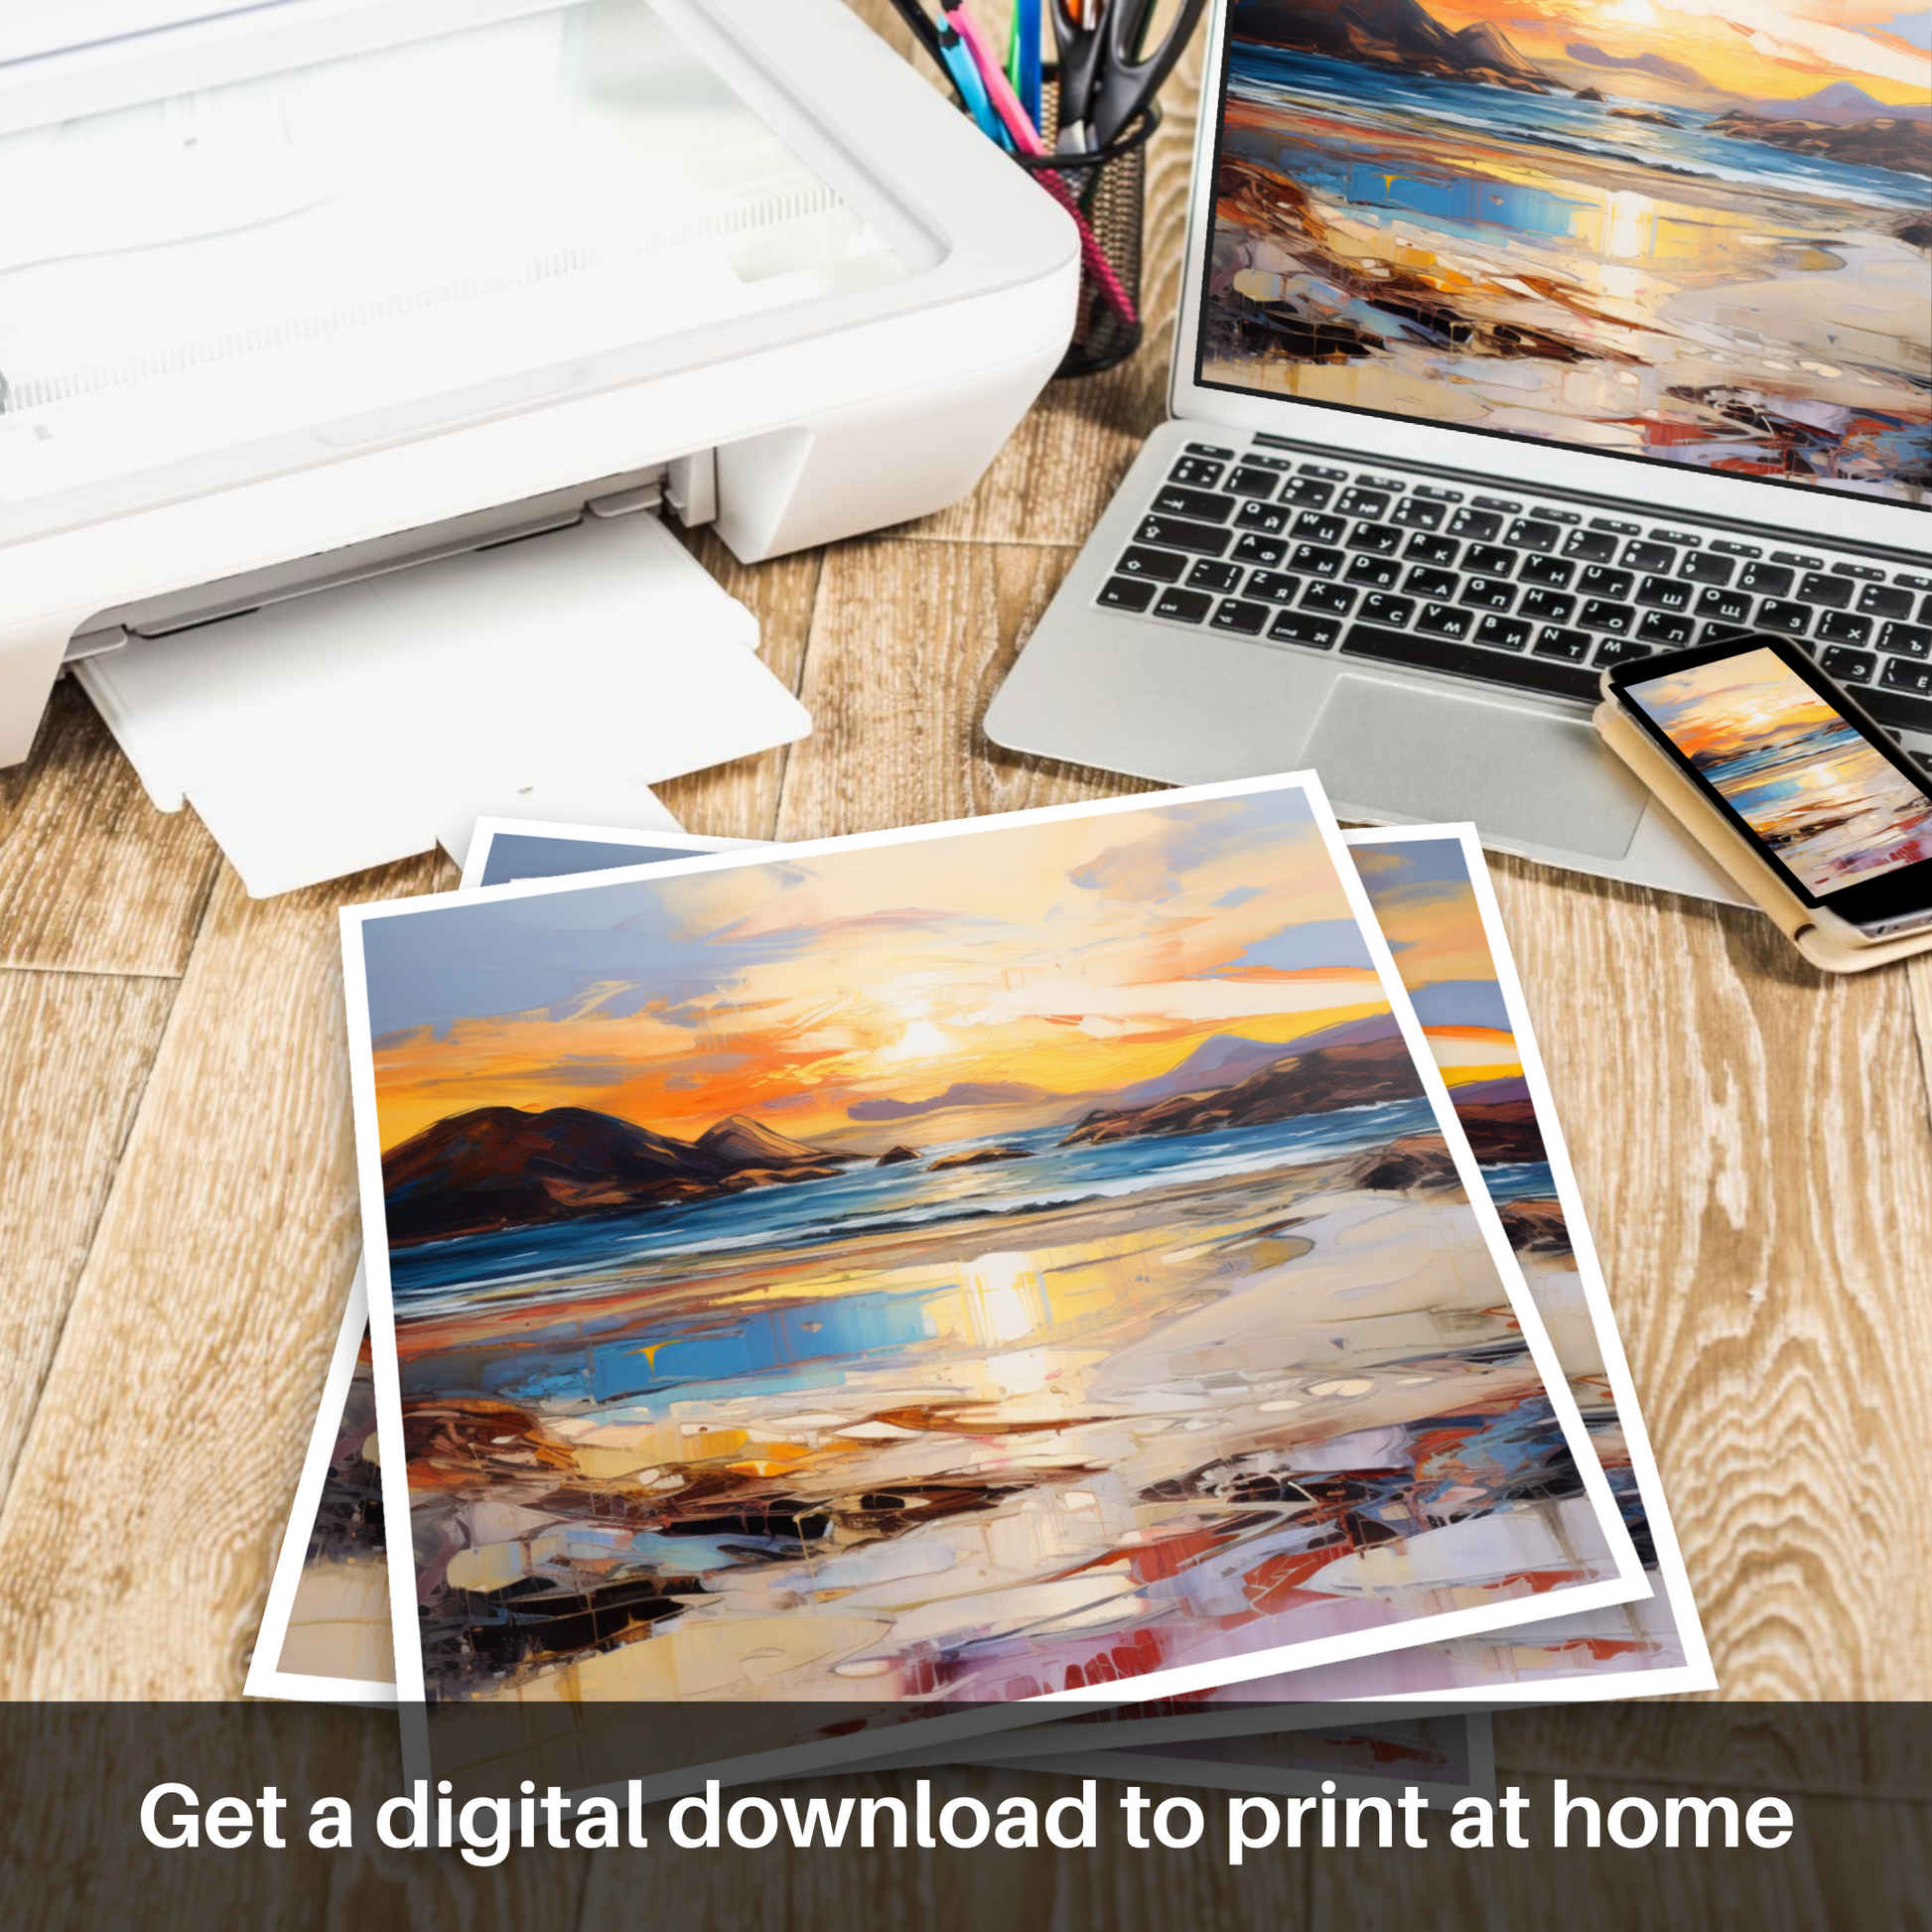 Downloadable and printable picture of Traigh Mhor at sunset